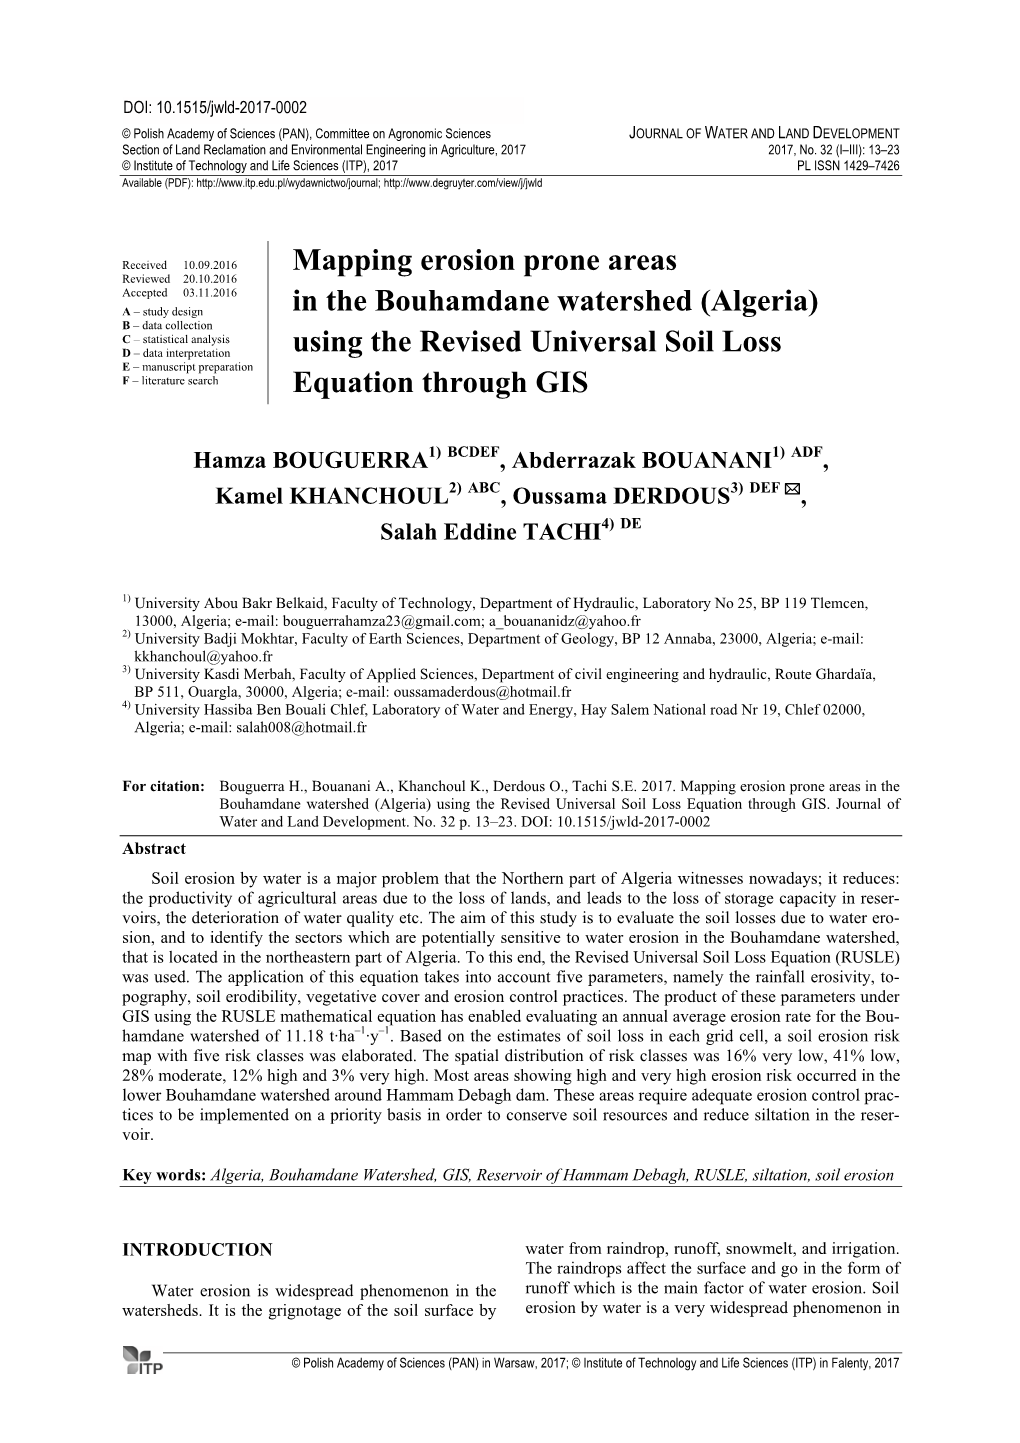 Mapping Erosion Prone Areas in the Bouhamdane Watershed (Algeria) Using the Revised Universal Soil Loss Equation Through GIS